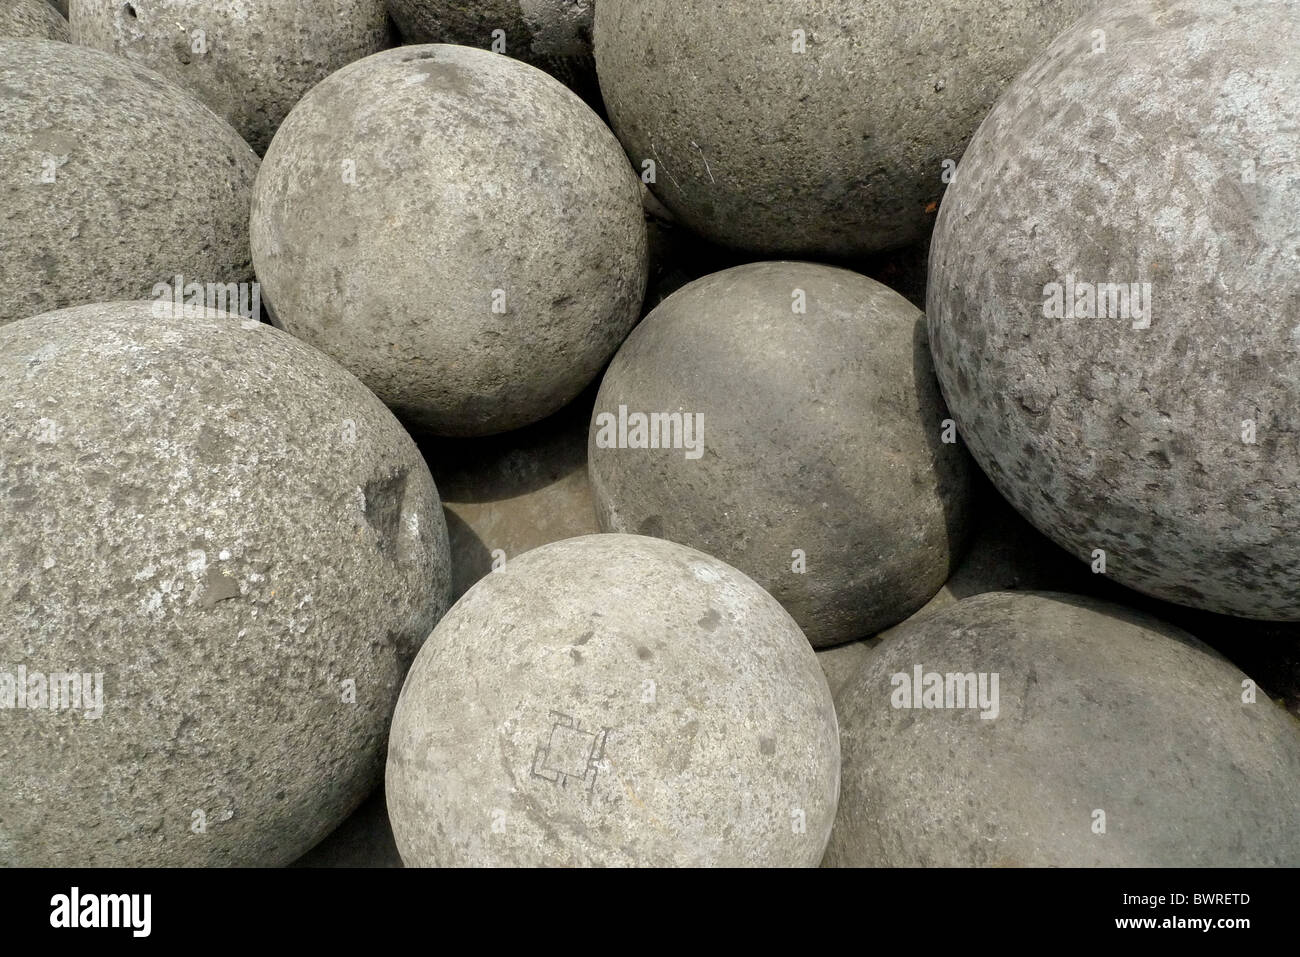 balls of stone, in differing sizes and weights. Stock Photo